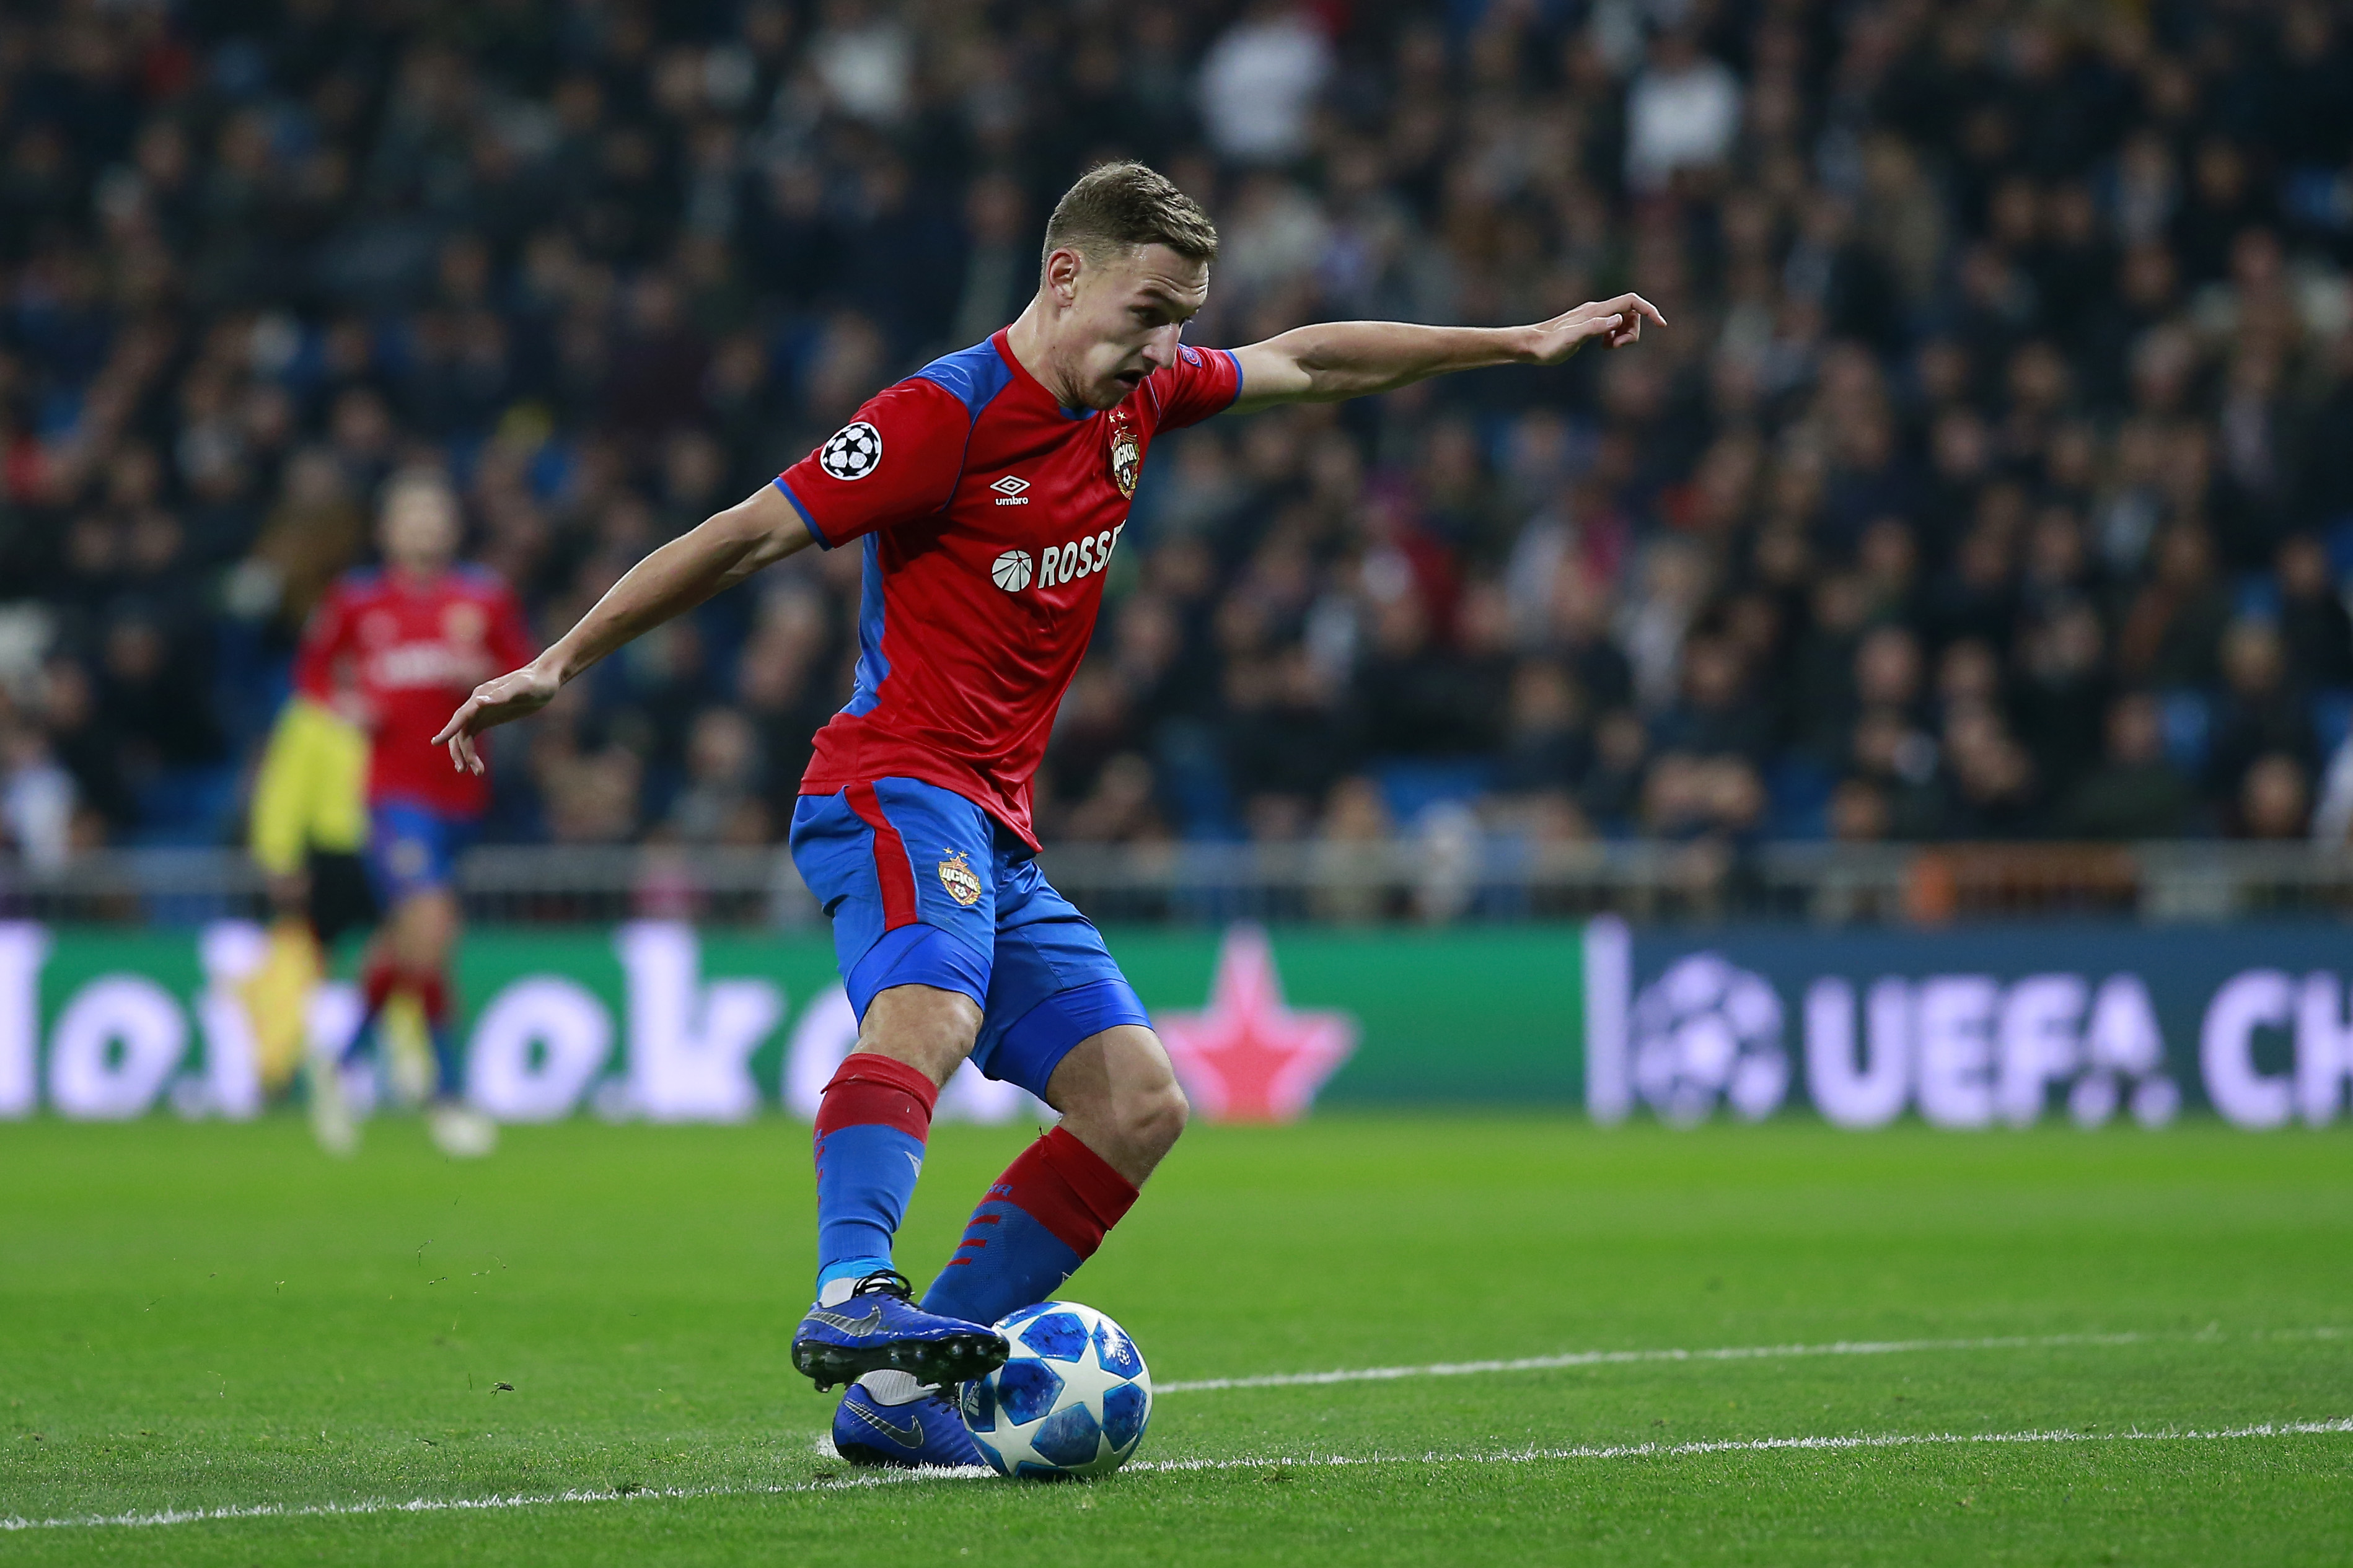 MADRID, SPAIN - DECEMBER 12:  Fyodor Chalov of CSK Moscow scores his team's first goal during the UEFA Champions League Group G match between Real Madrid  and CSKA Moscow at Bernabeu on December 12, 2018 in Madrid, Spain.  (Photo by Gonzalo Arroyo Moreno/Getty Images)